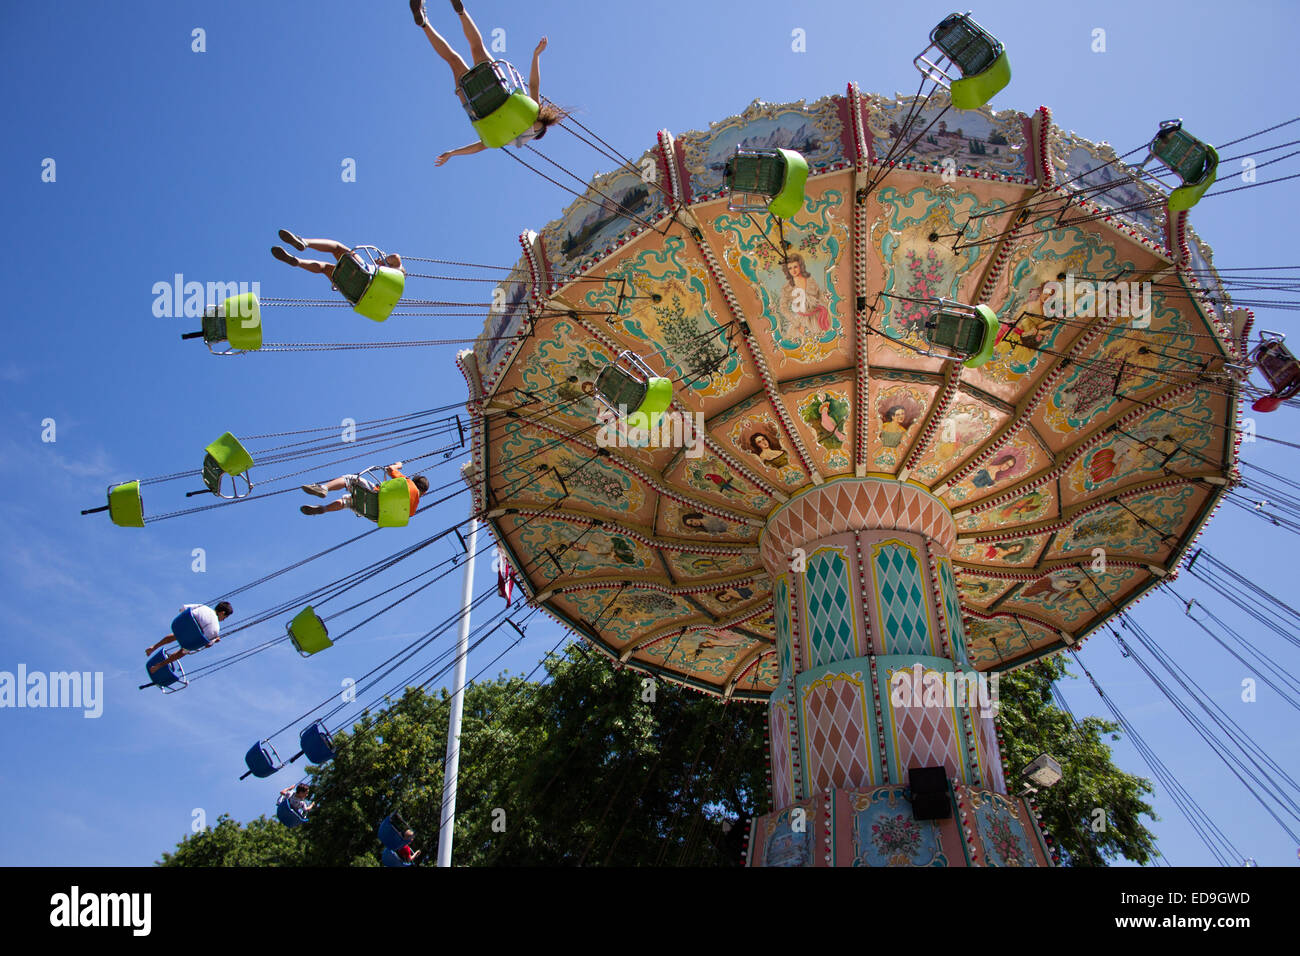 High flying fun on the carousel ride at the amusement park. Stock Photo